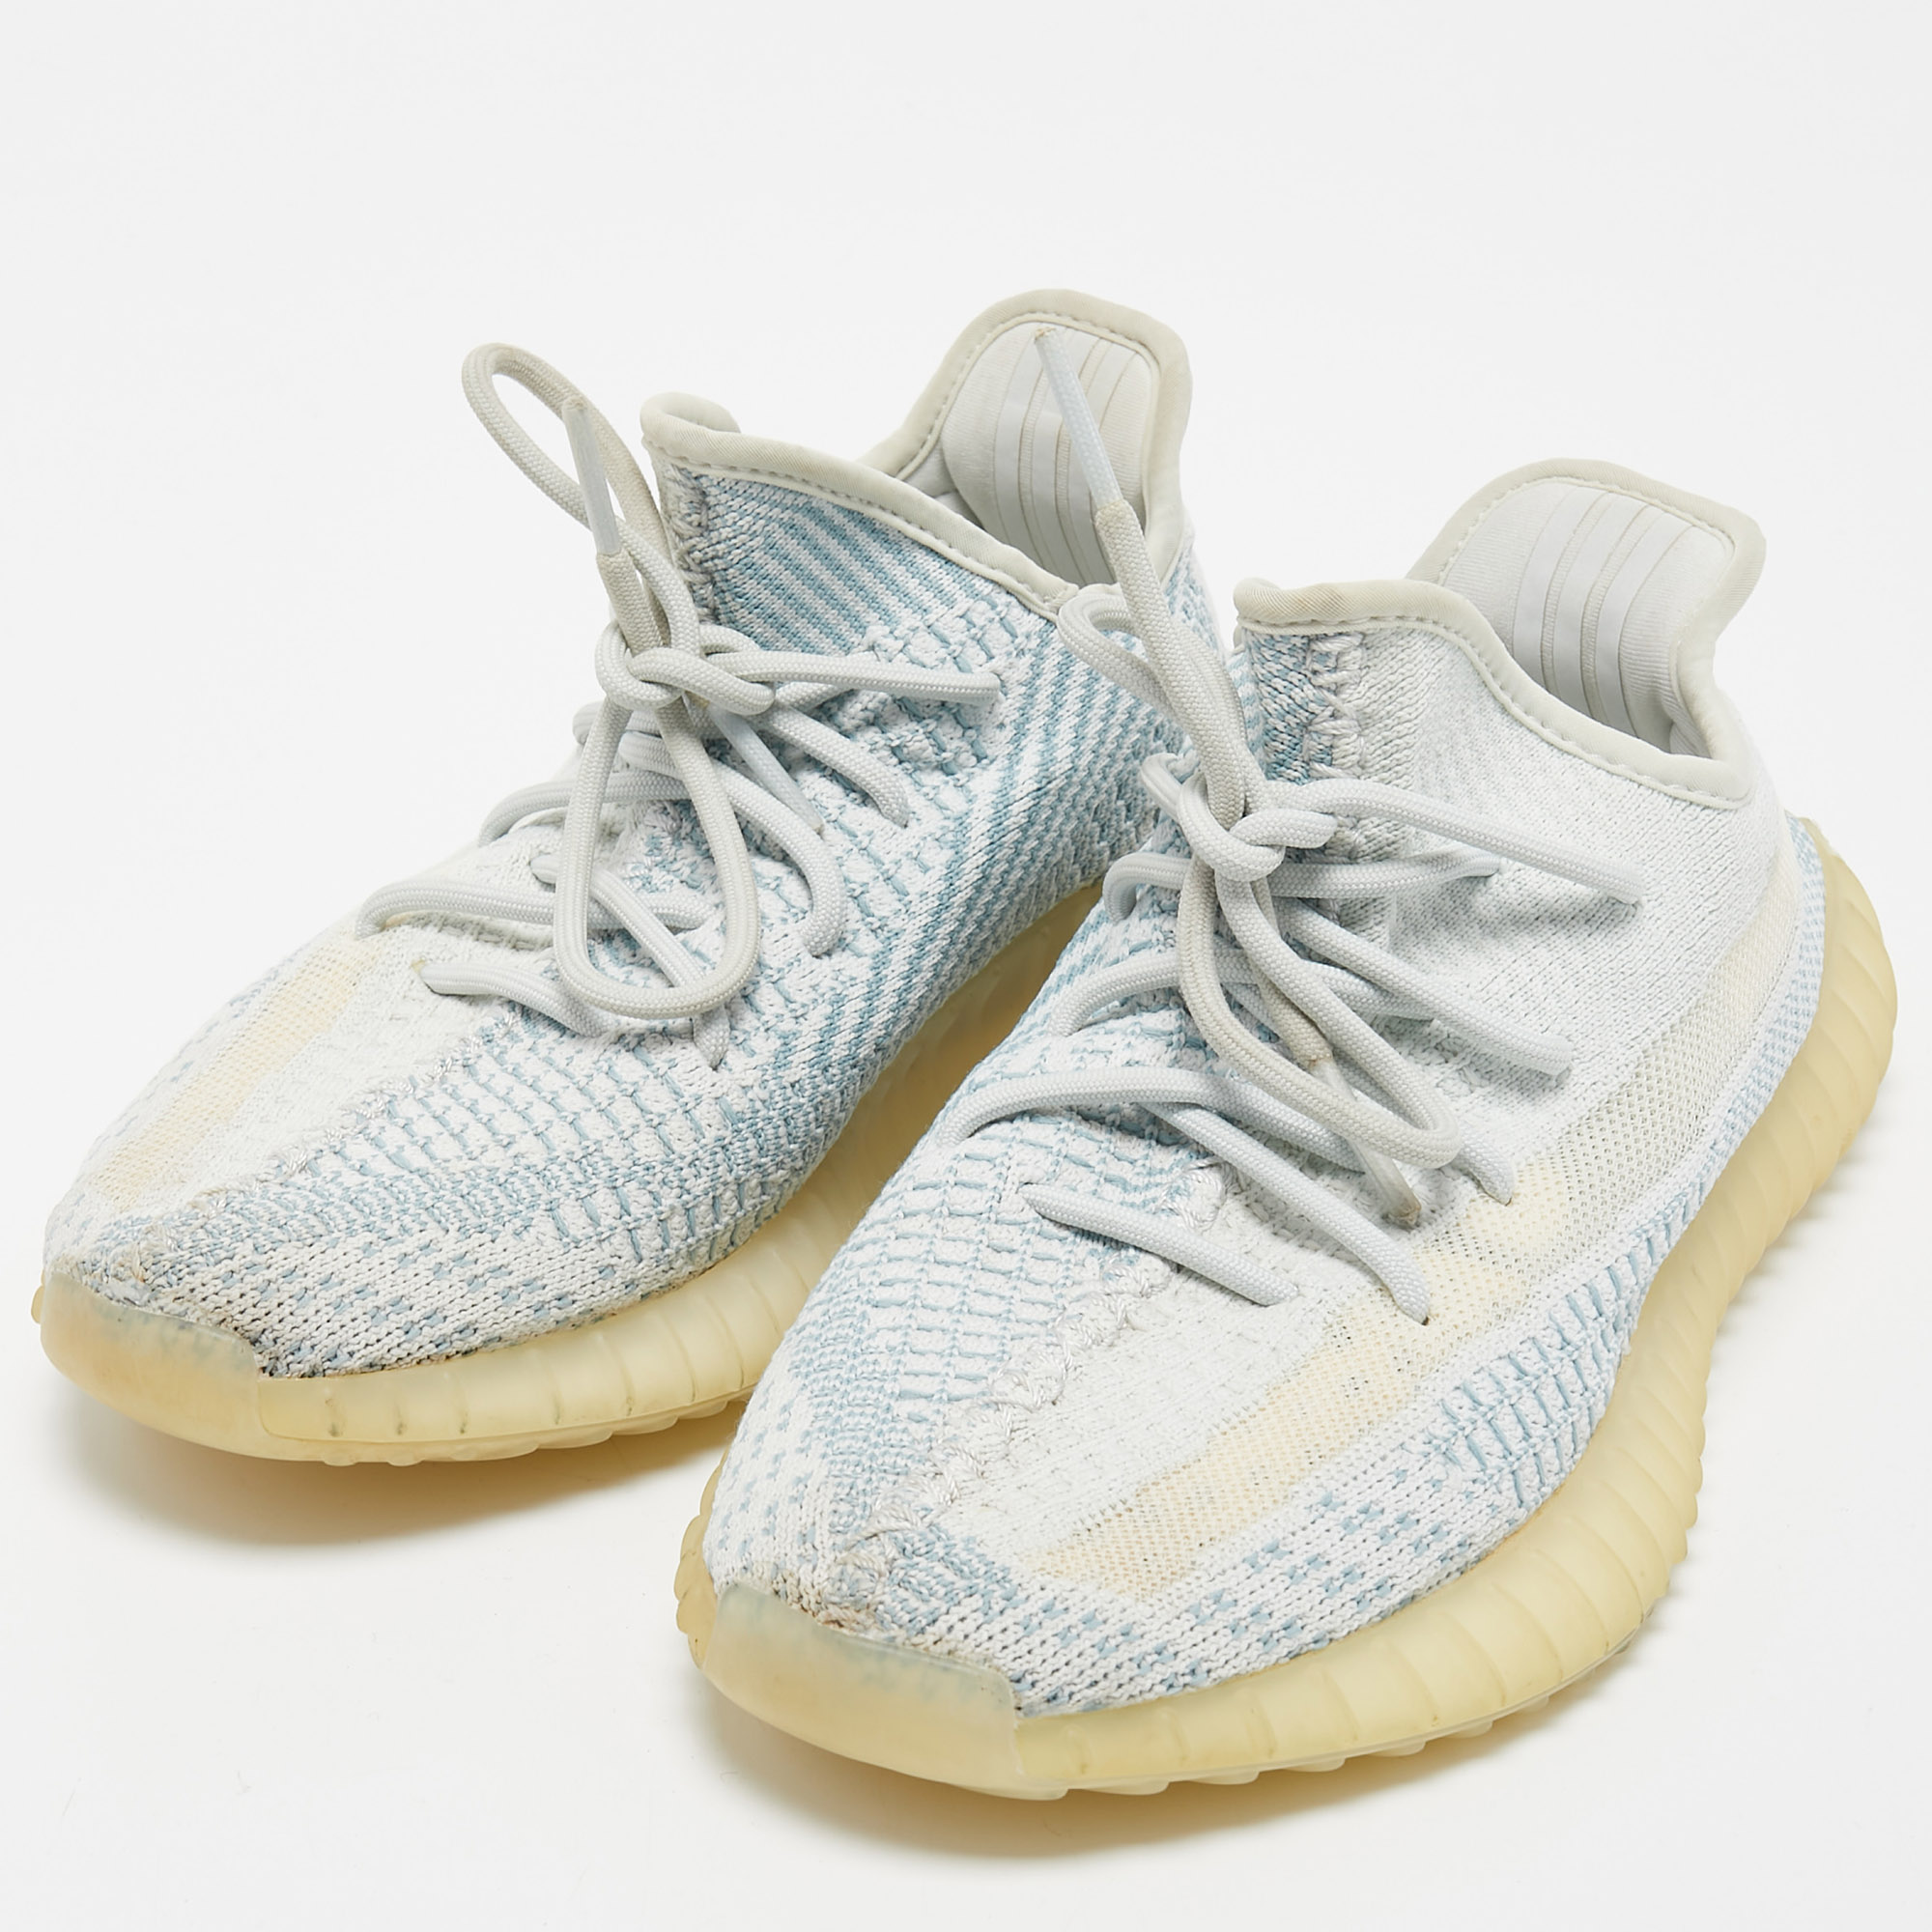 

Yeezy x Adidas Blue/White Knit Fabric Boost 350 V2 Cloud- White Sneakers Size 39 1/3